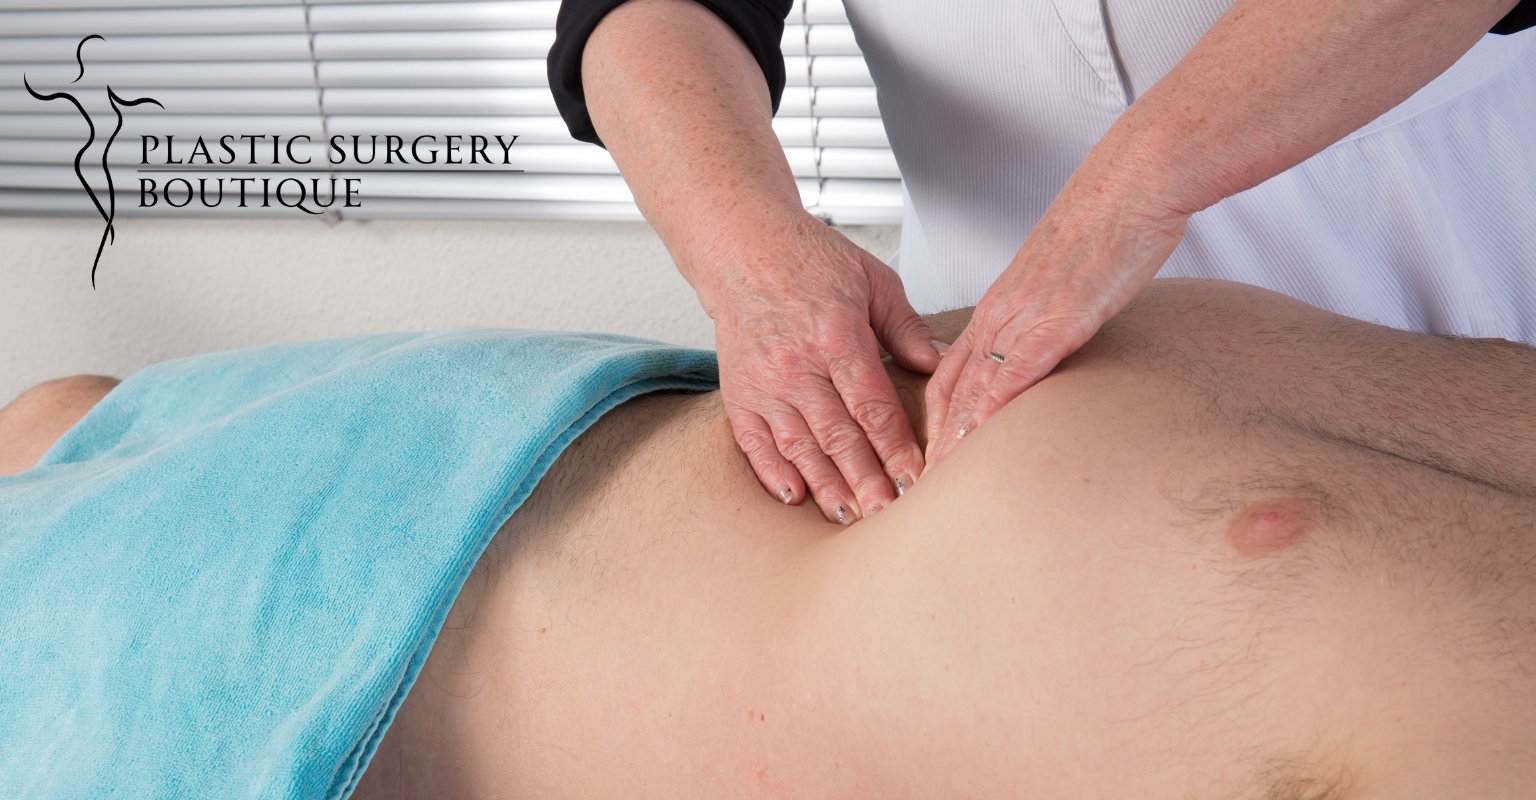 Person receiving lymphatic drainage massage after plastic surgery